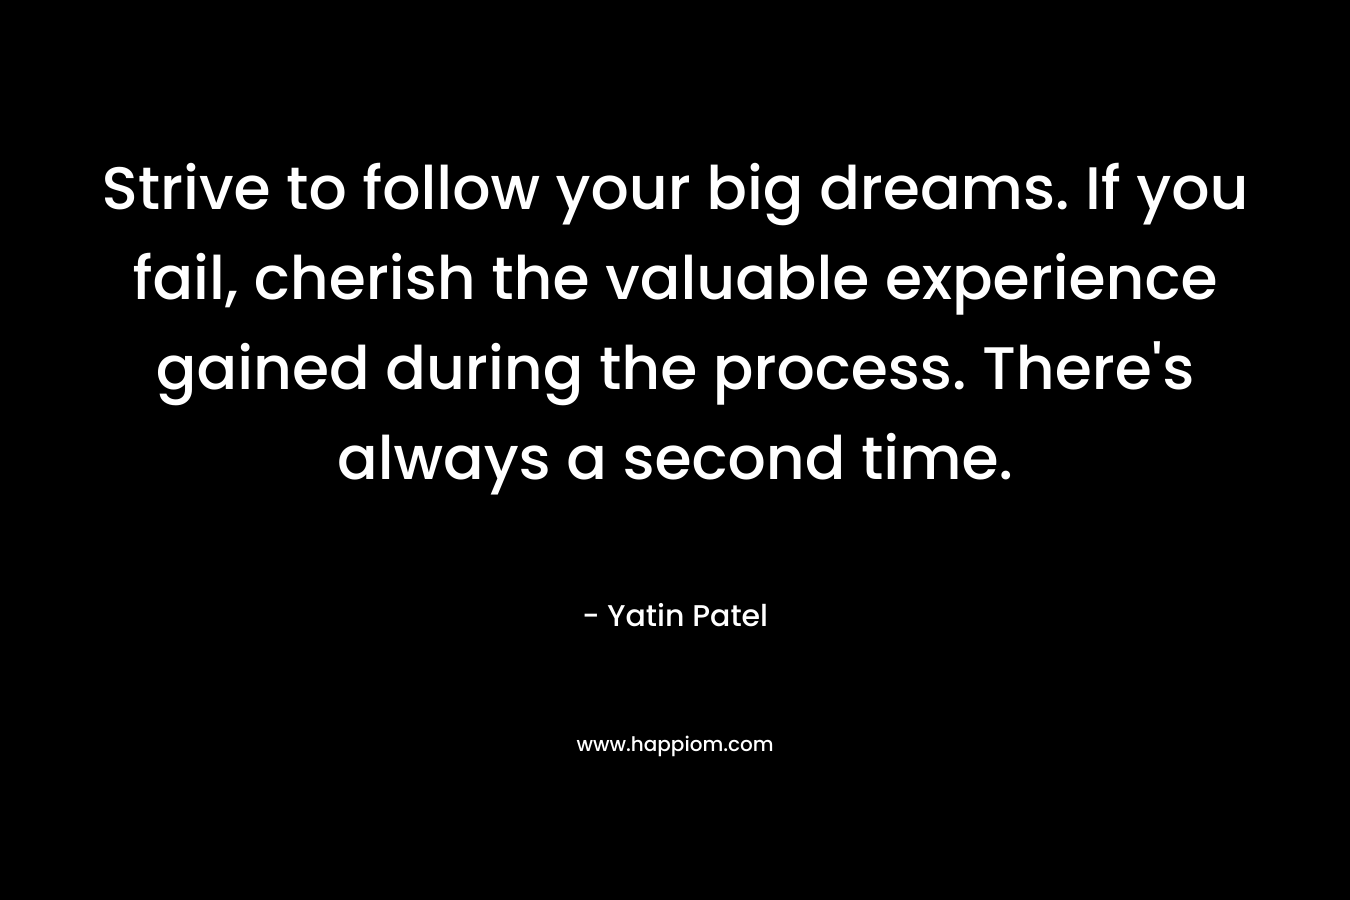 Strive to follow your big dreams. If you fail, cherish the valuable experience gained during the process. There's always a second time.